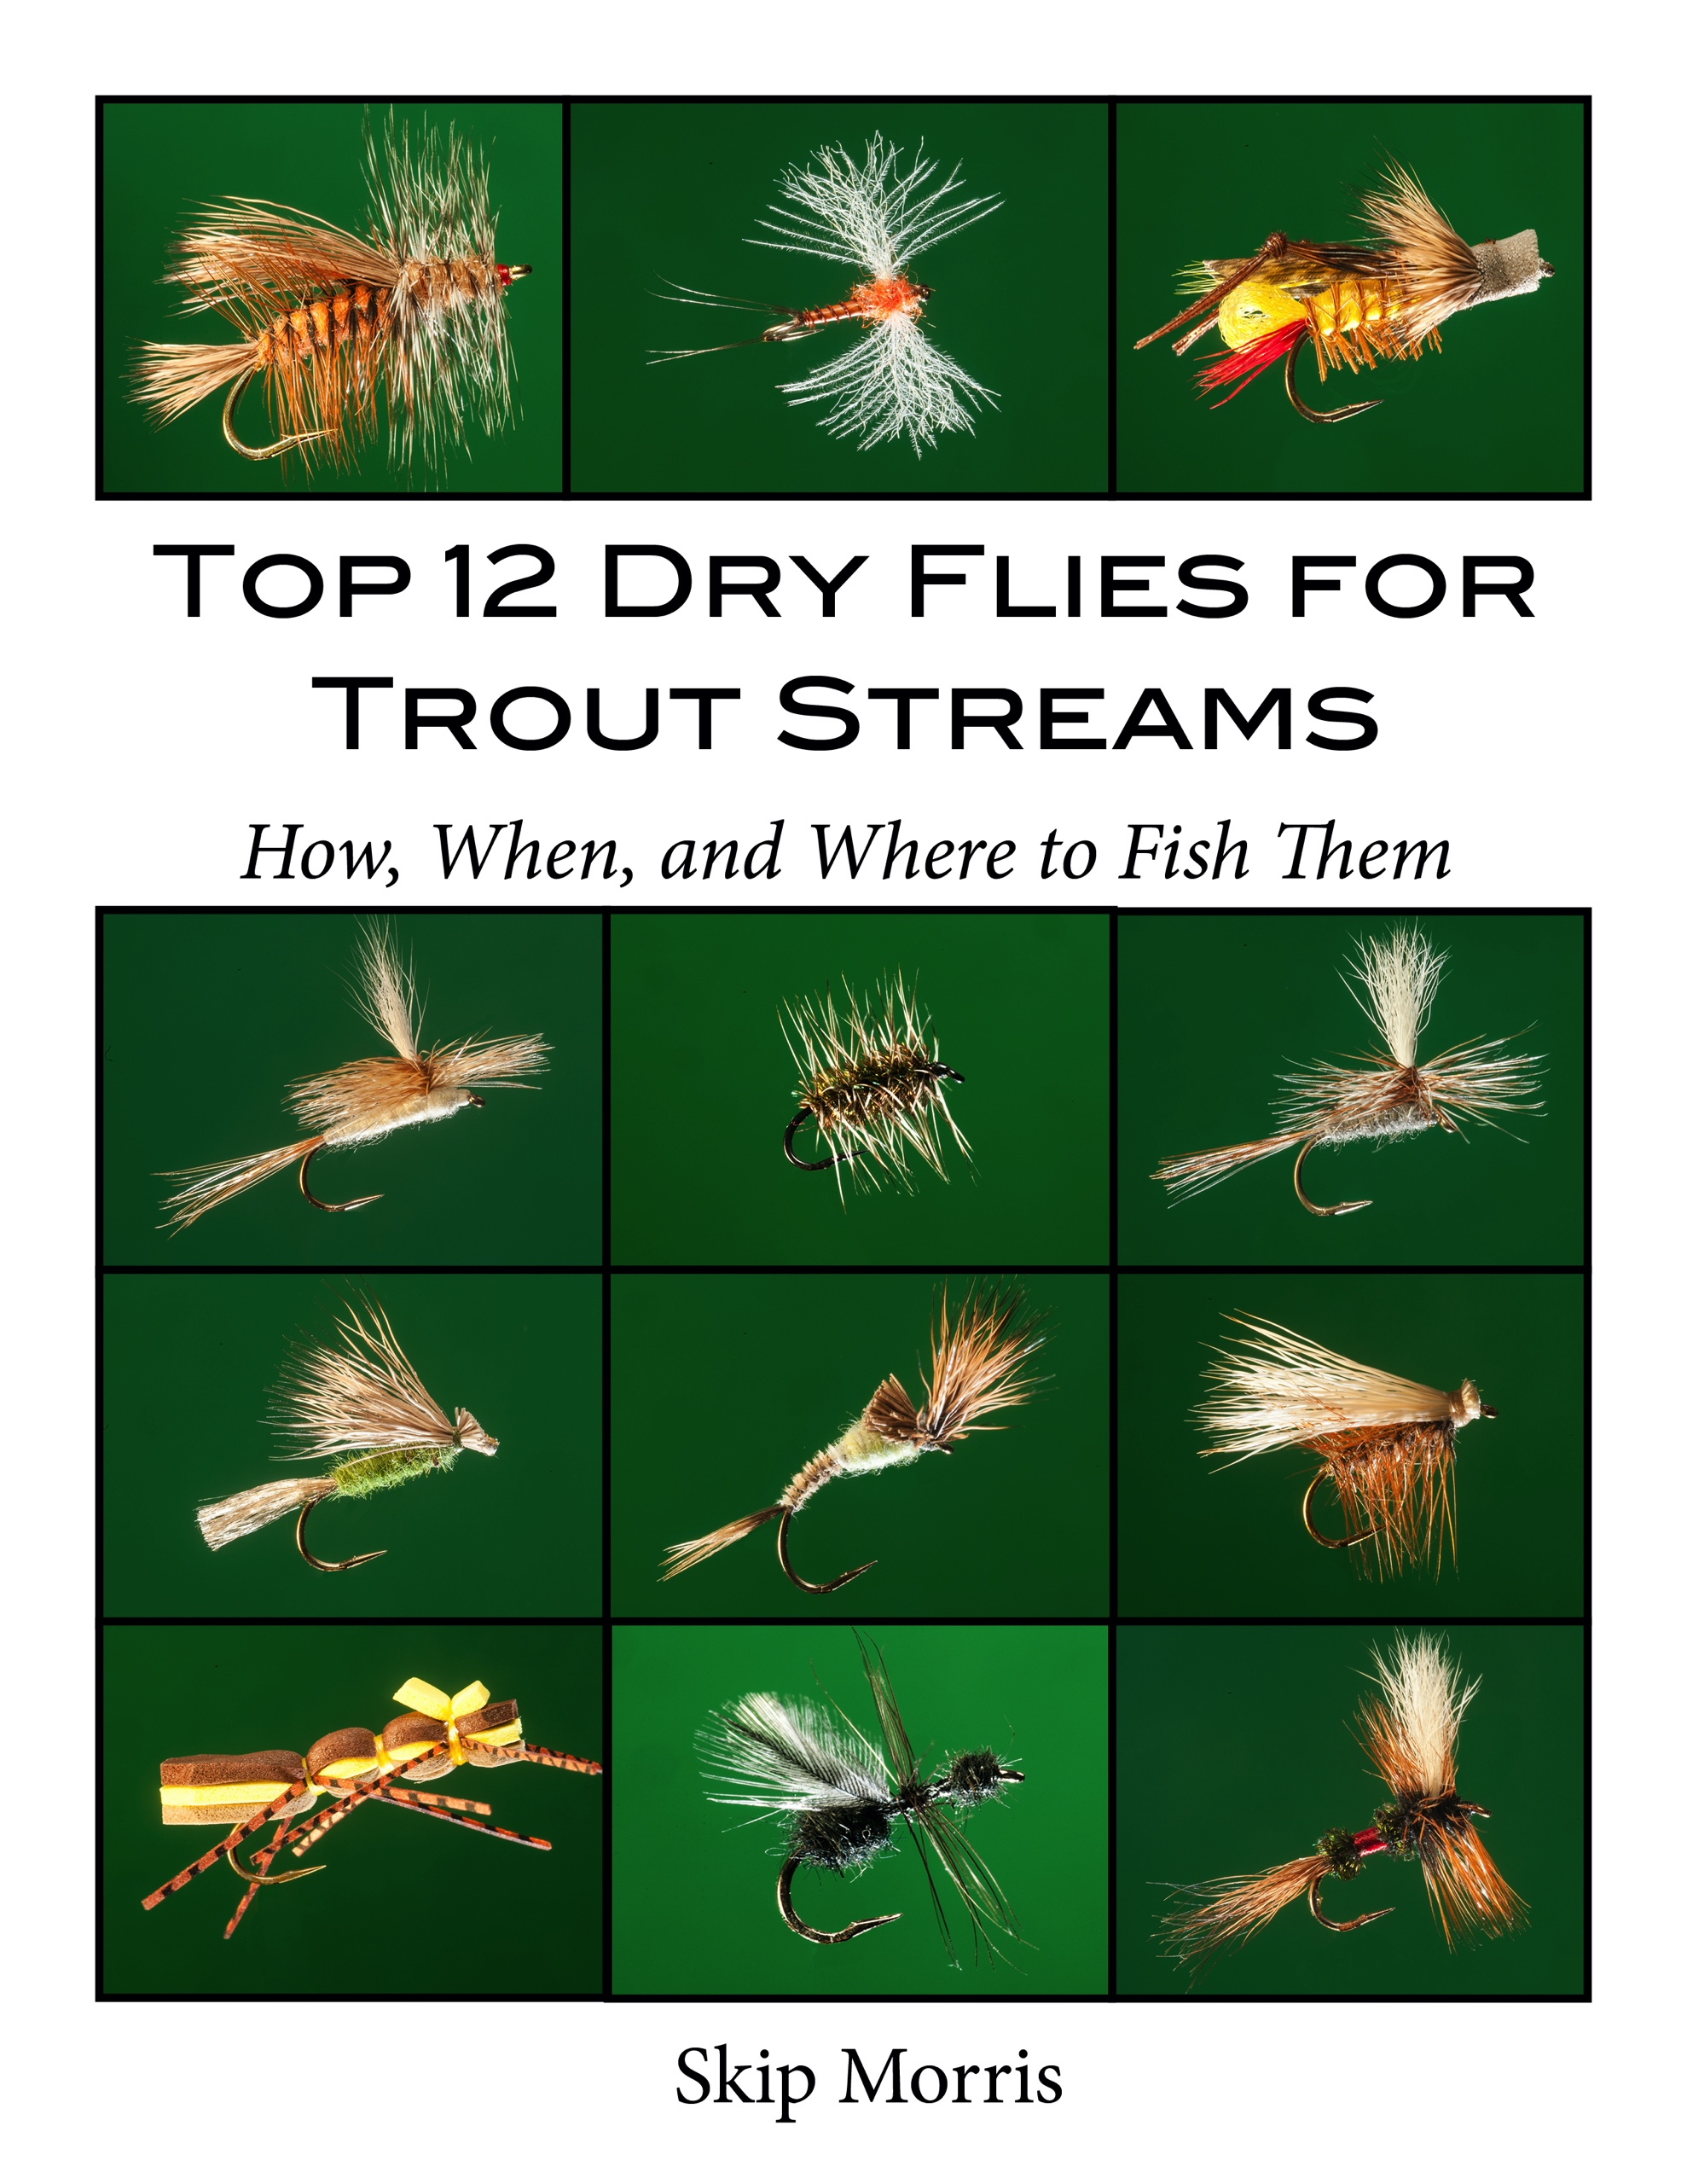 Top 12 Dry Flies for Trout Streams Cover